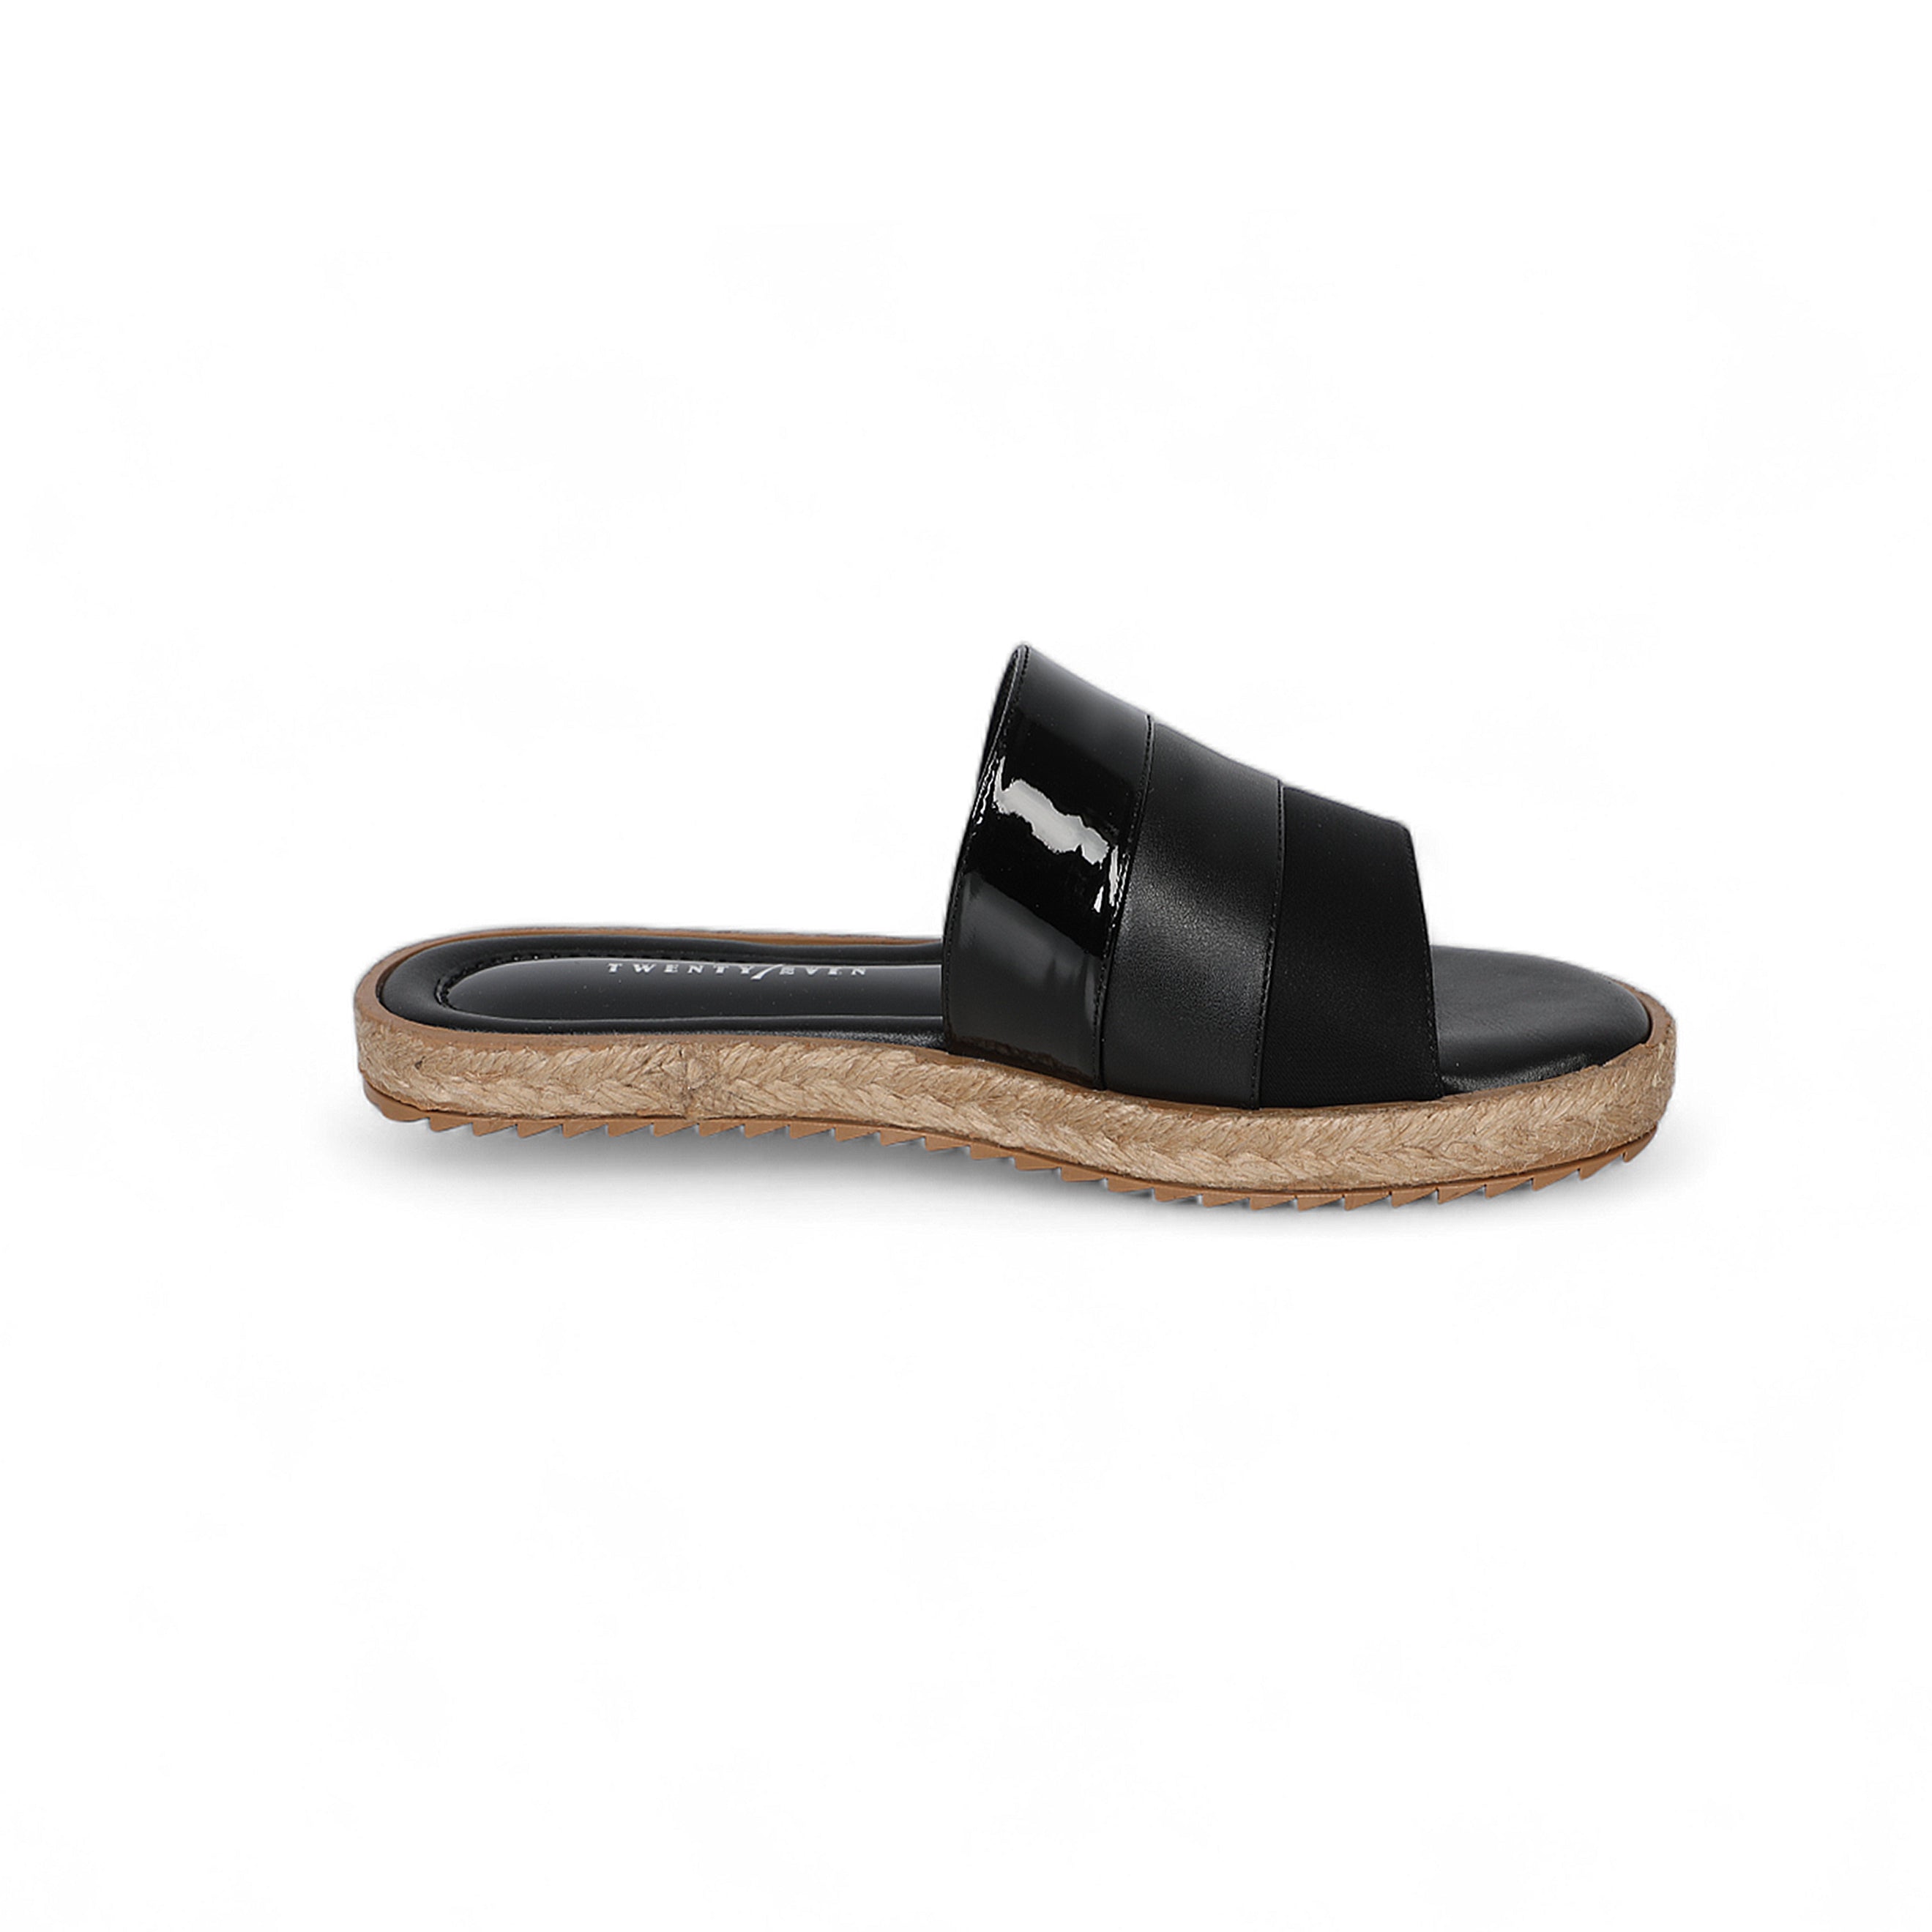 One Strap Black Slipper With Small Insole